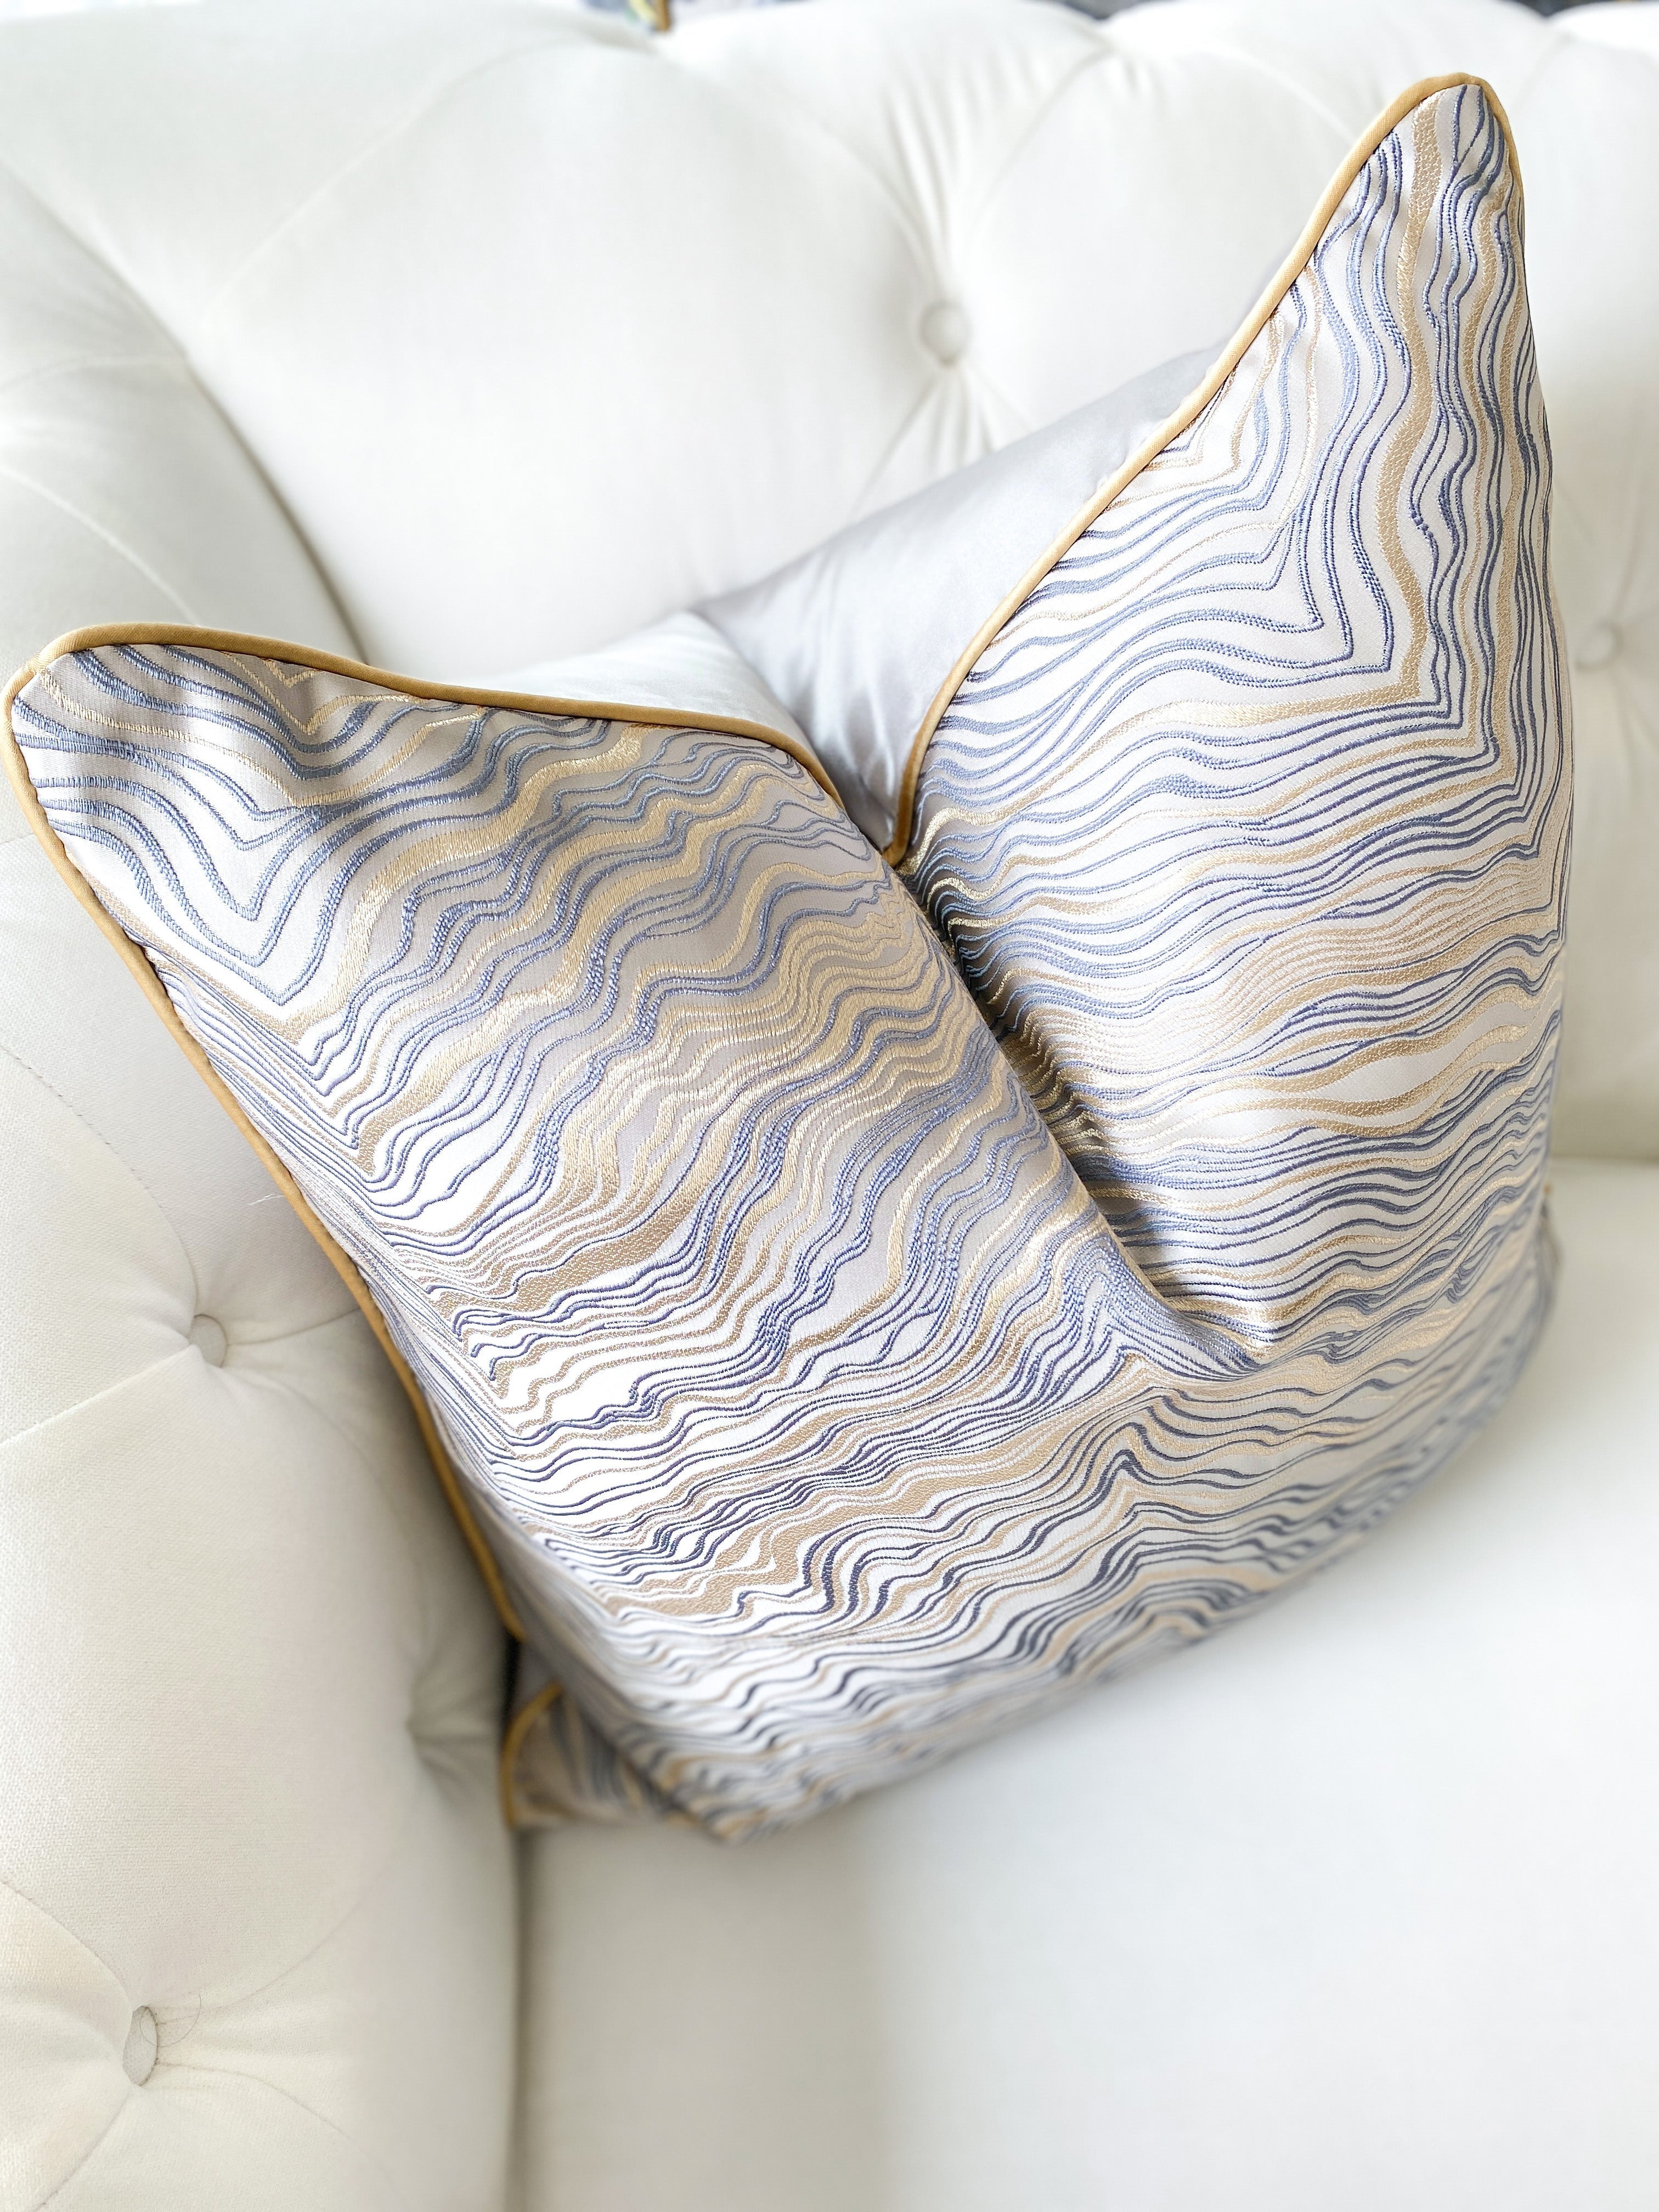 Gold Foil & Silver Wavy Pattern Pillow Cover 22x22 - HTS HOME DECOR